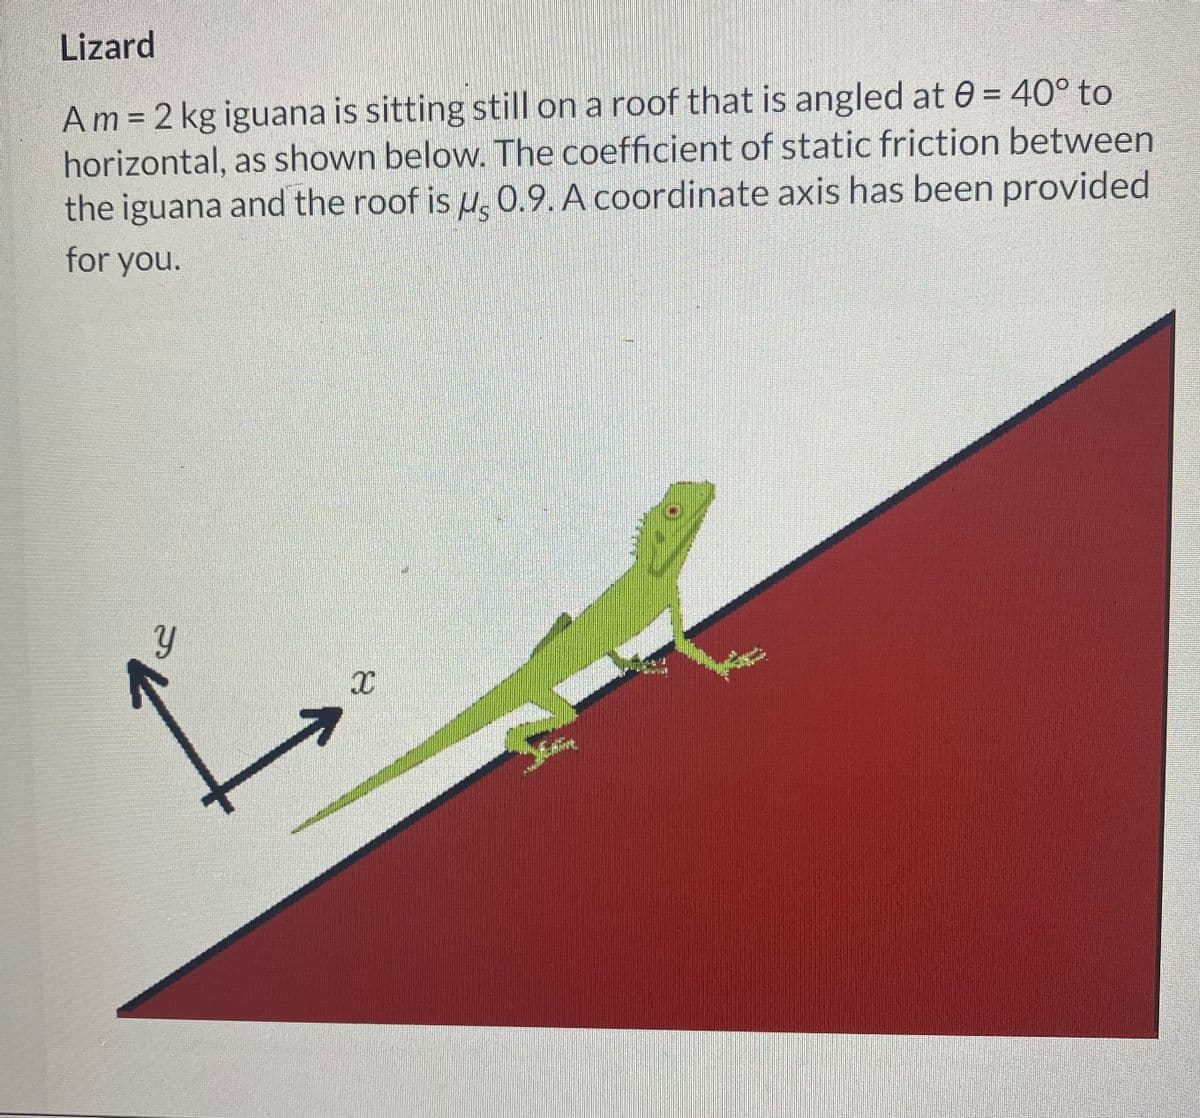 Lizard
Am = 2 kg iguana is sitting still on a roof that is angled at 0= 40° to
horizontal, as shown below. The coefficient of static friction between
the iguana and the roof is u 0.9. A coordinate axis has been provided
for you.
Y
7
X